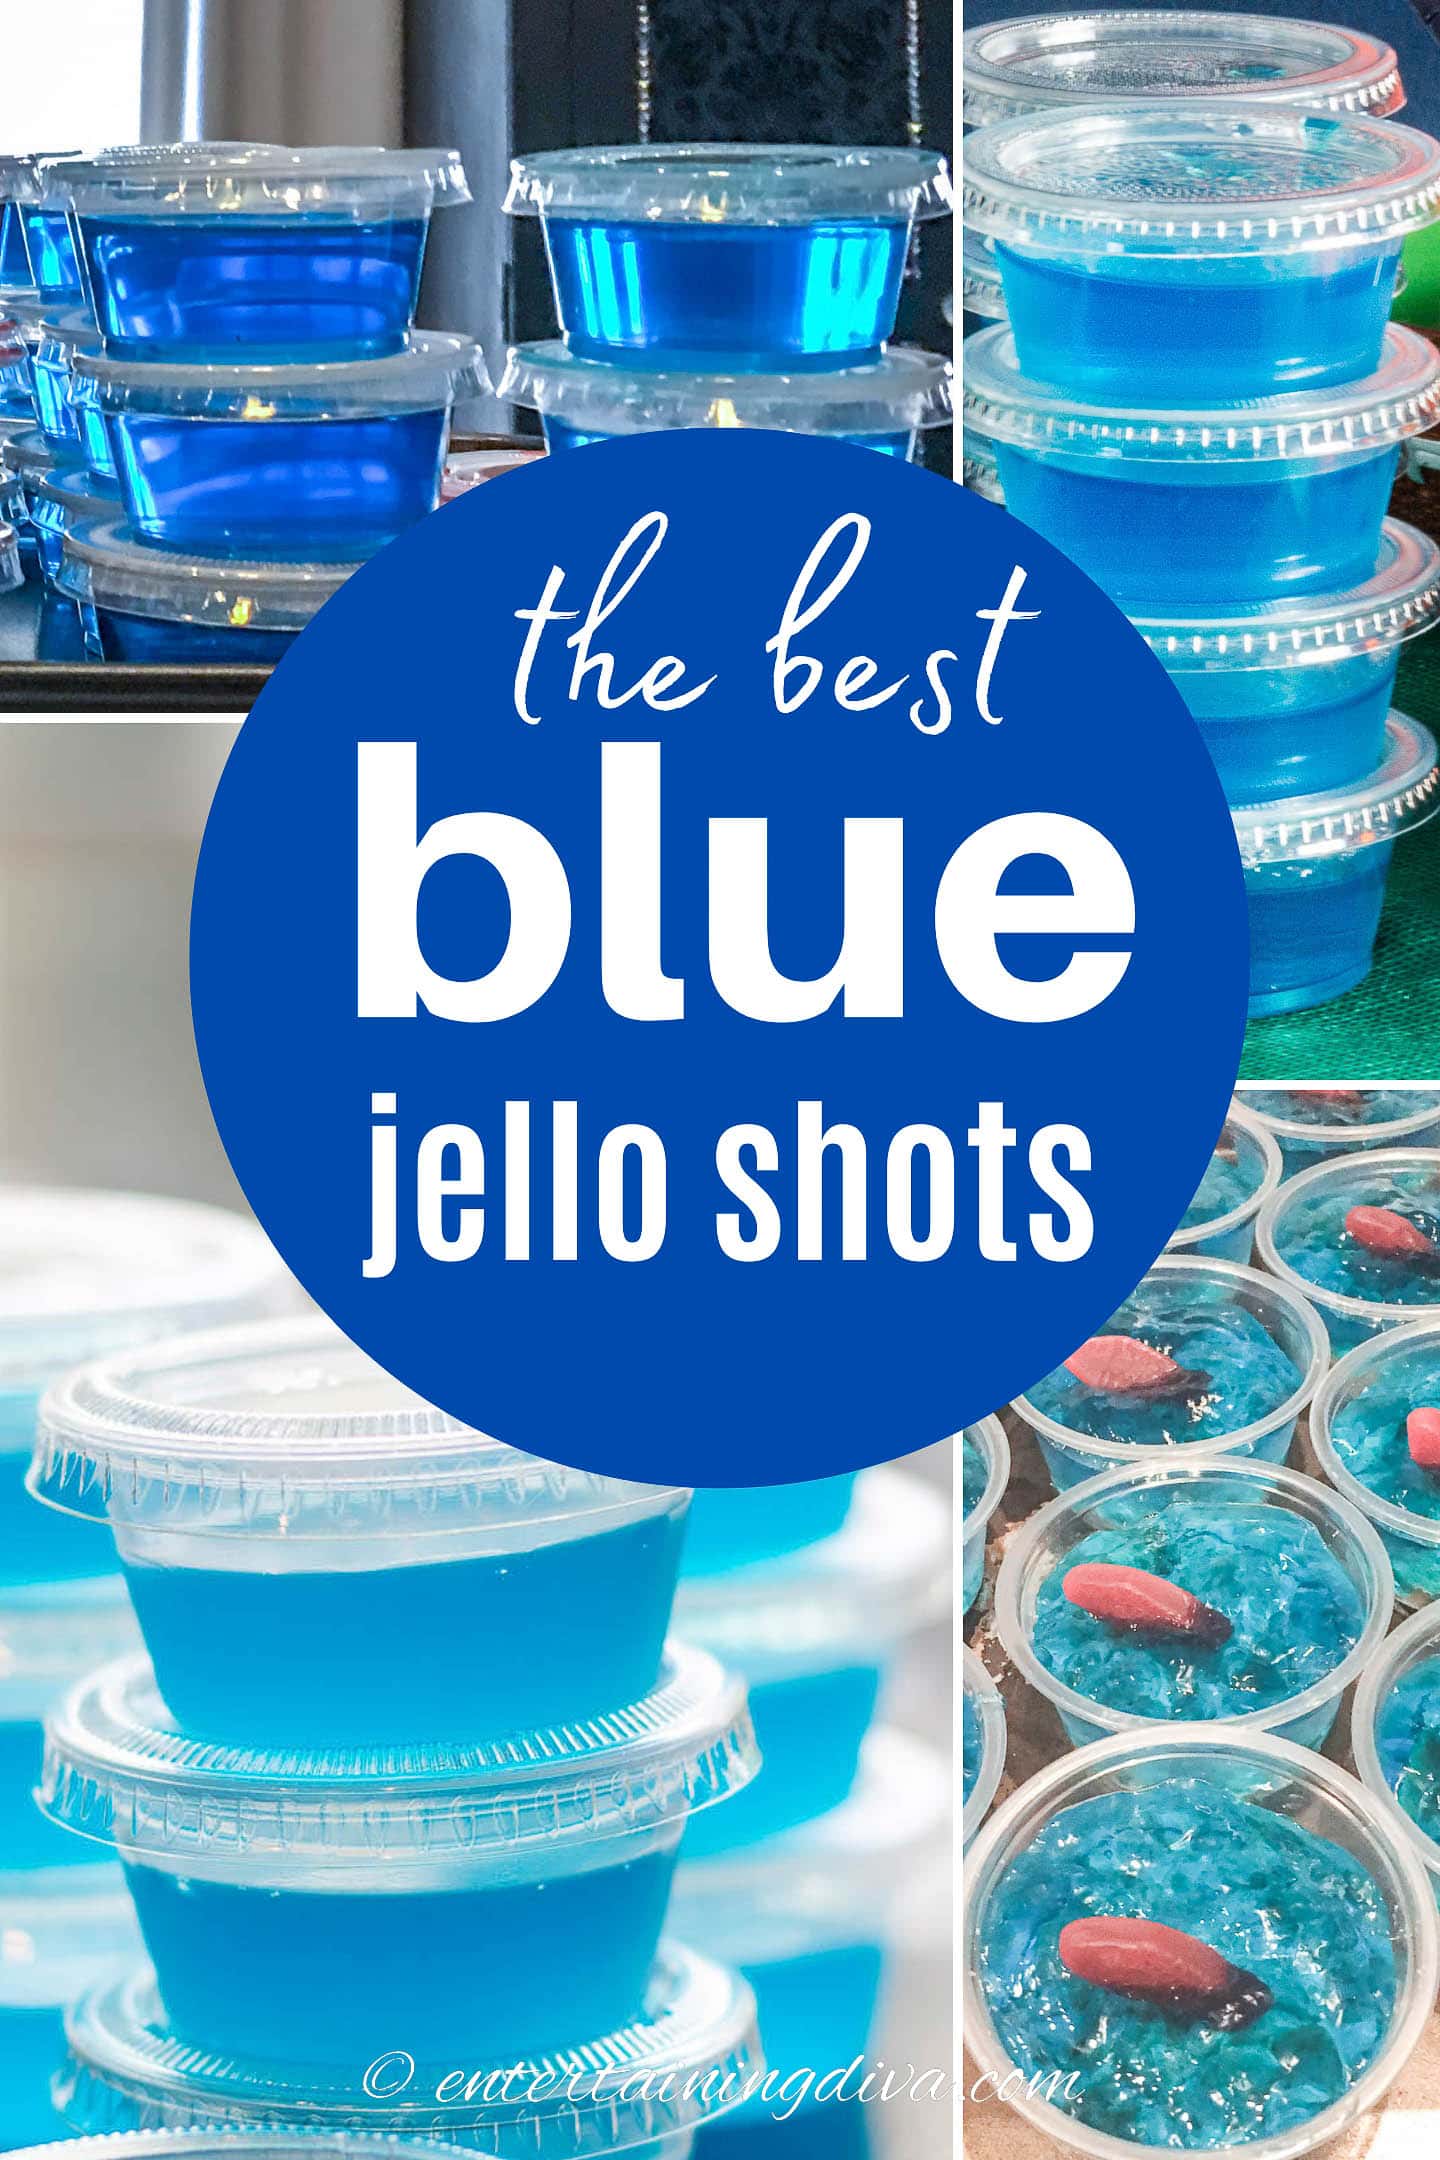 4 pictures of blue jello shots with the text "the best blue jello shots" over the middle